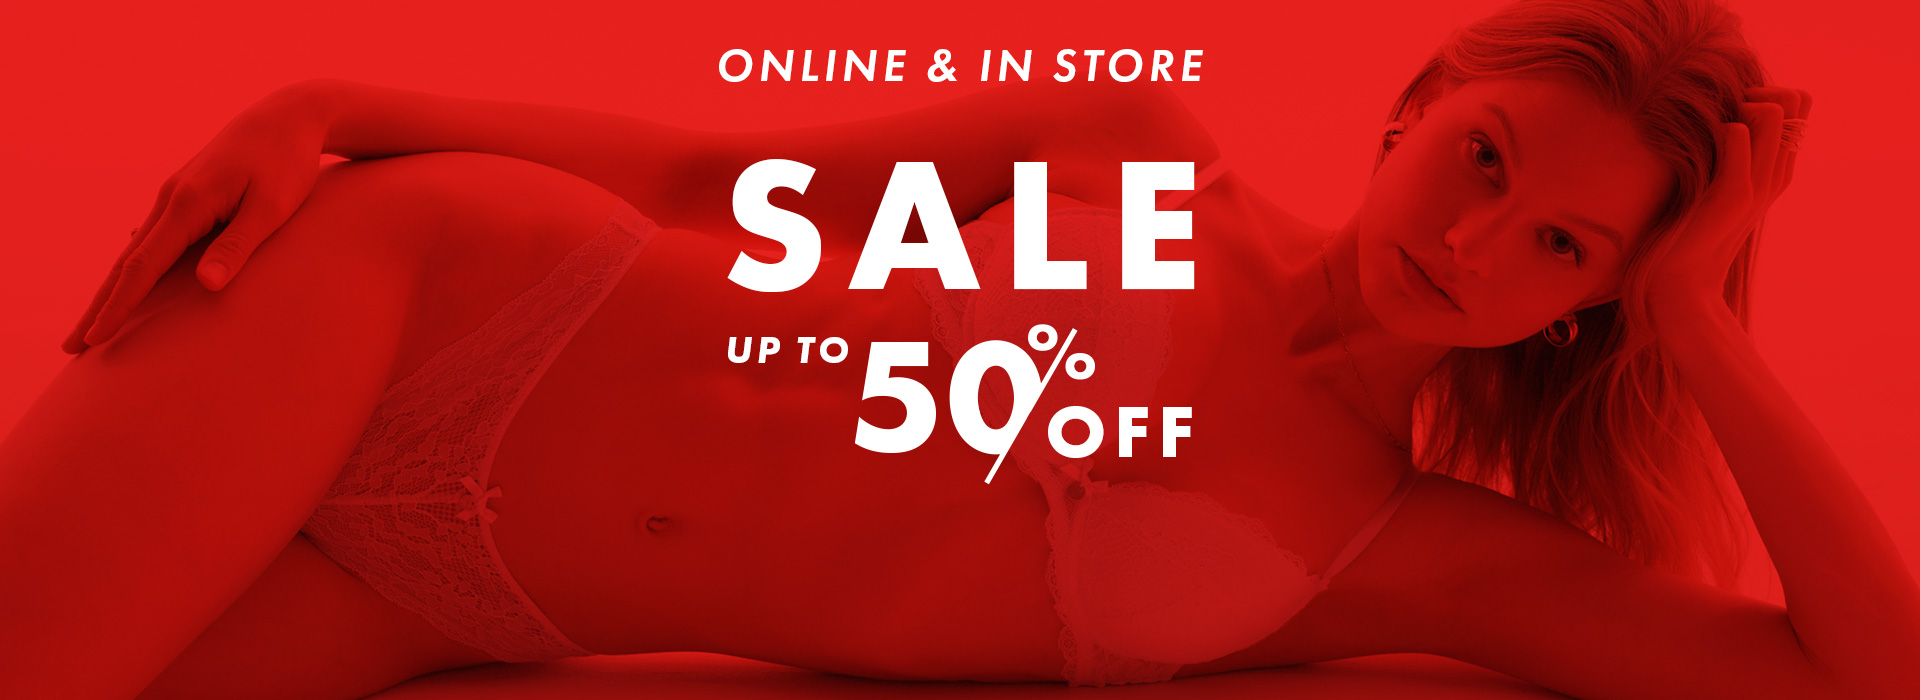 Sale - up to 50% off